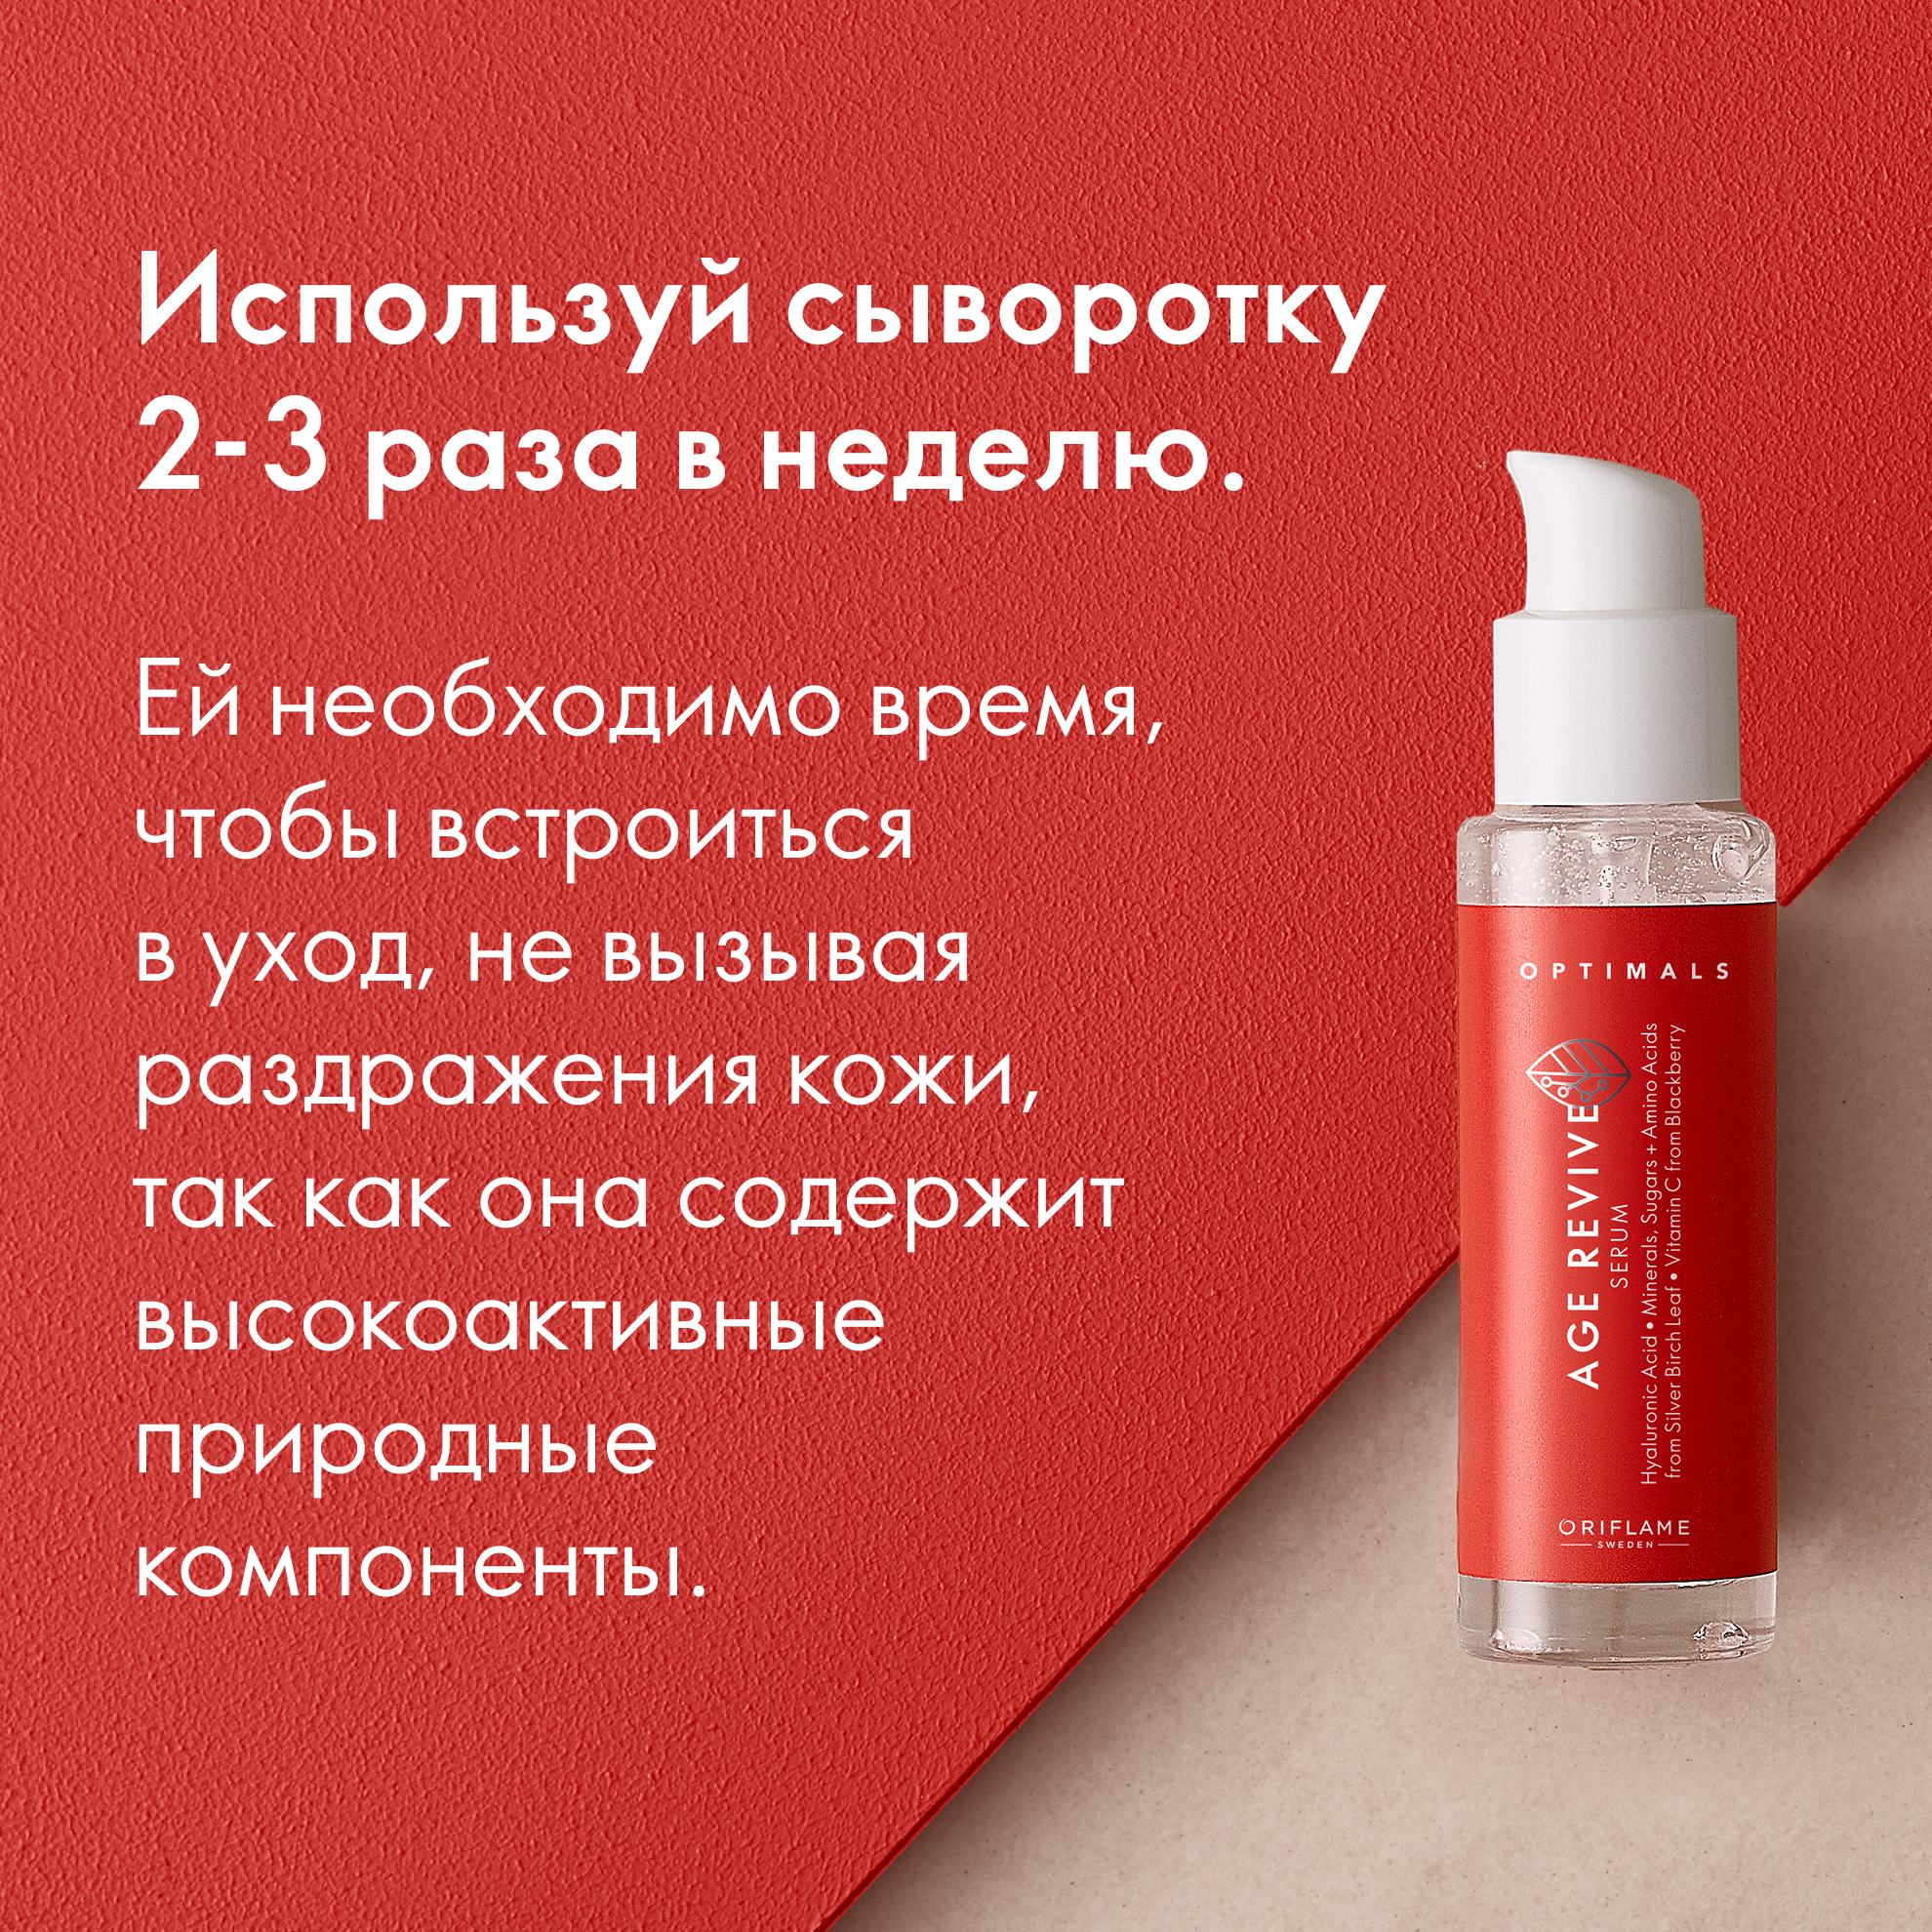 https://media-cdn.oriflame.com/productImage?externalMediaId=product-management-media%2fProducts%2f42551%2fKG%2f42551_5.png&id=15087739&version=1